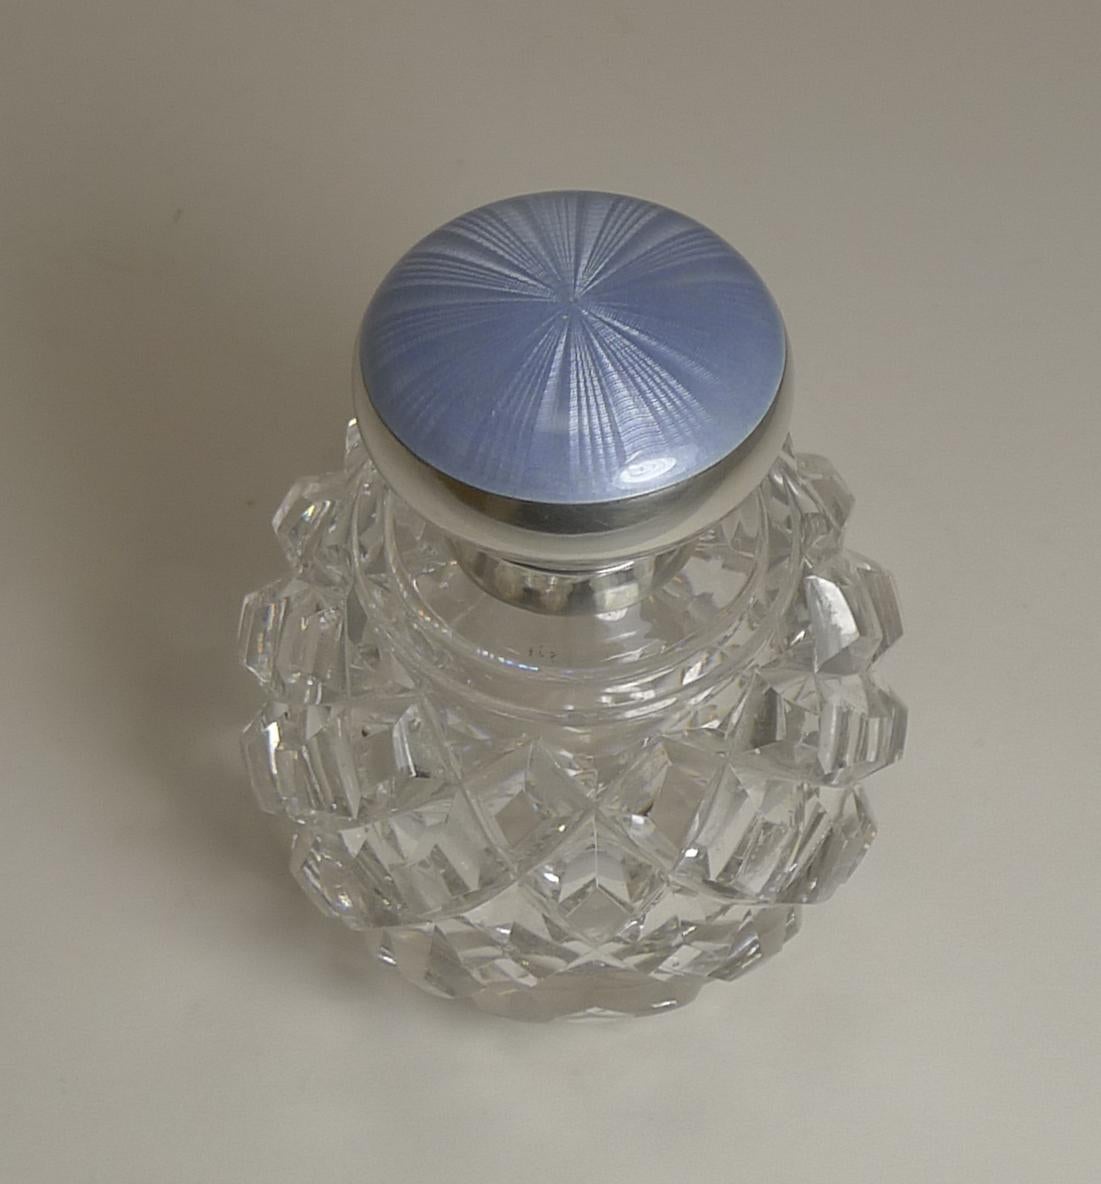 A wonderful clean example of an antique perfume or scent globe made from heavy crystal, deeply cut, wonderfully tactile.

The collar and hinged lid are made from solid English sterling silver hallmarked for London 1911, together with the makers